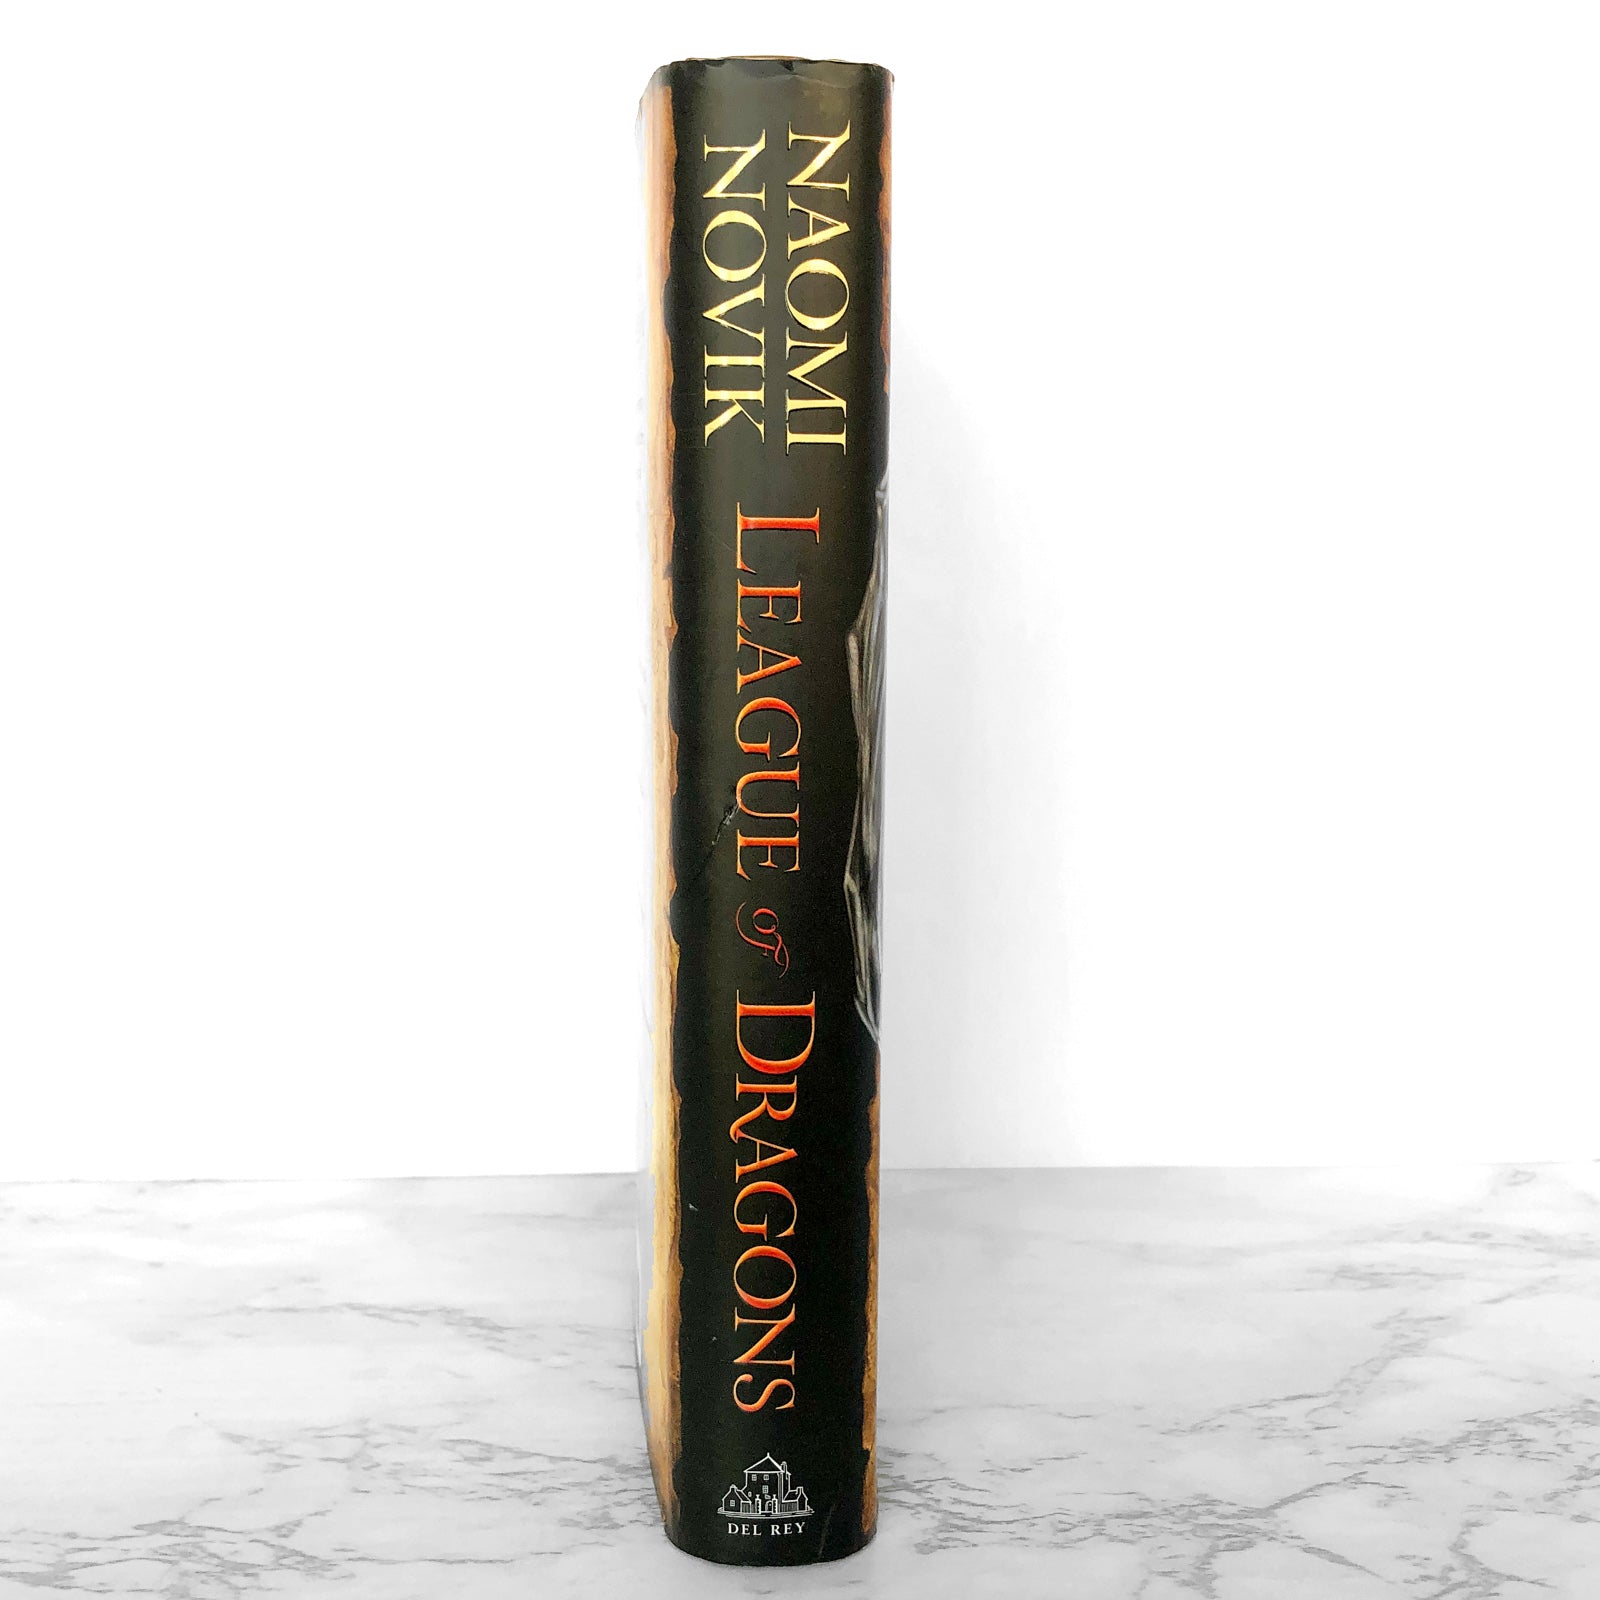 League of Dragons by Naomi Novik SIGNED! [FIRST EDITION / FIRST PRINTI